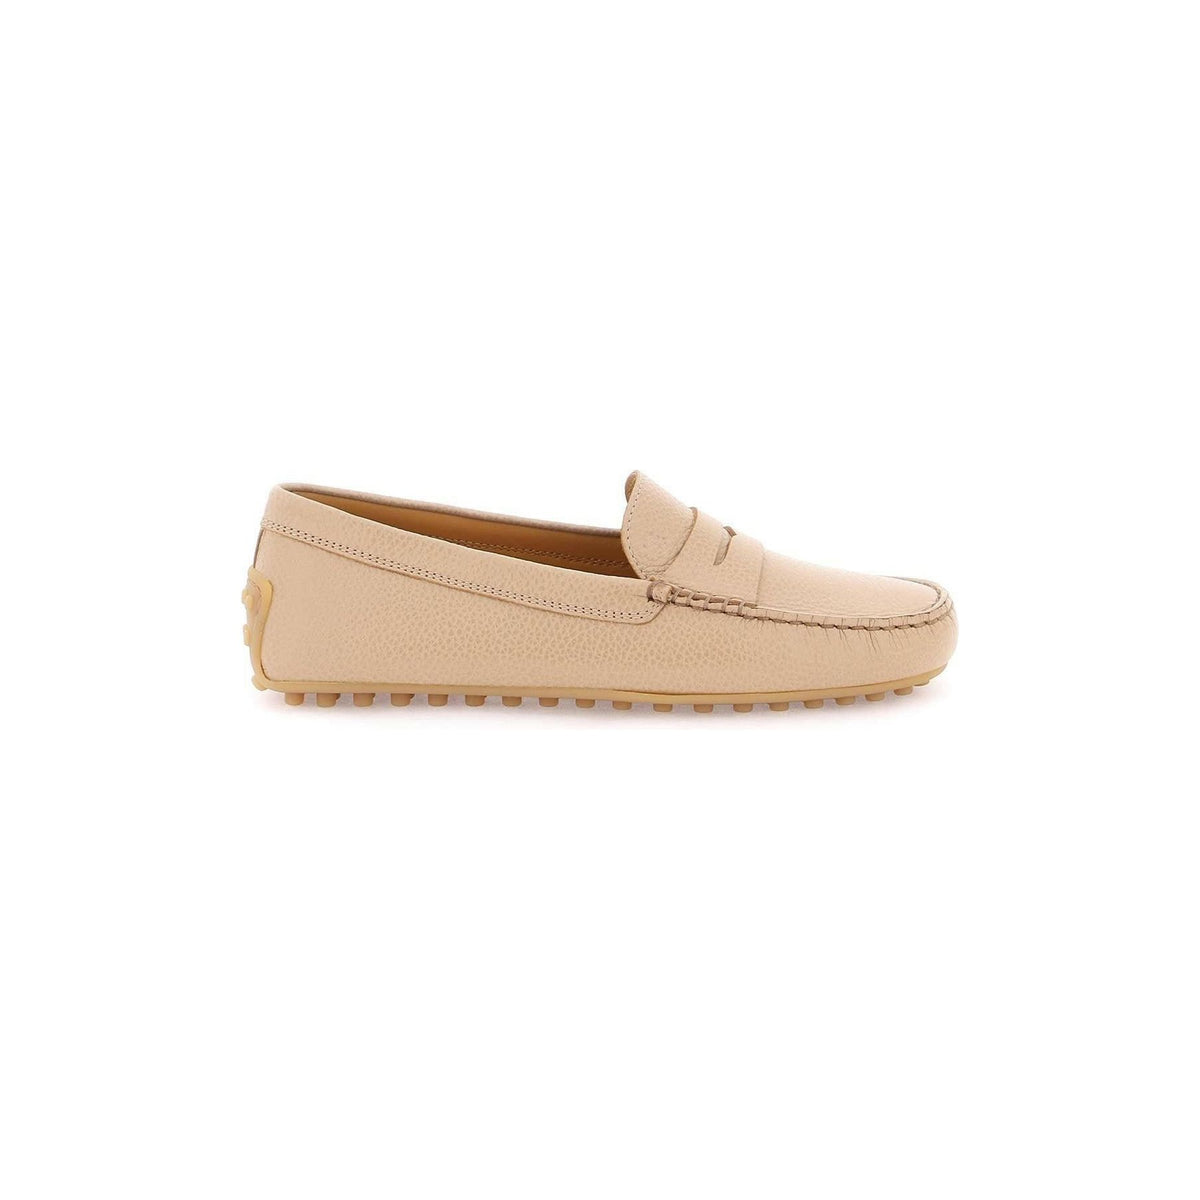 TOD'S - City Gommino Leather Loafers - JOHN JULIA